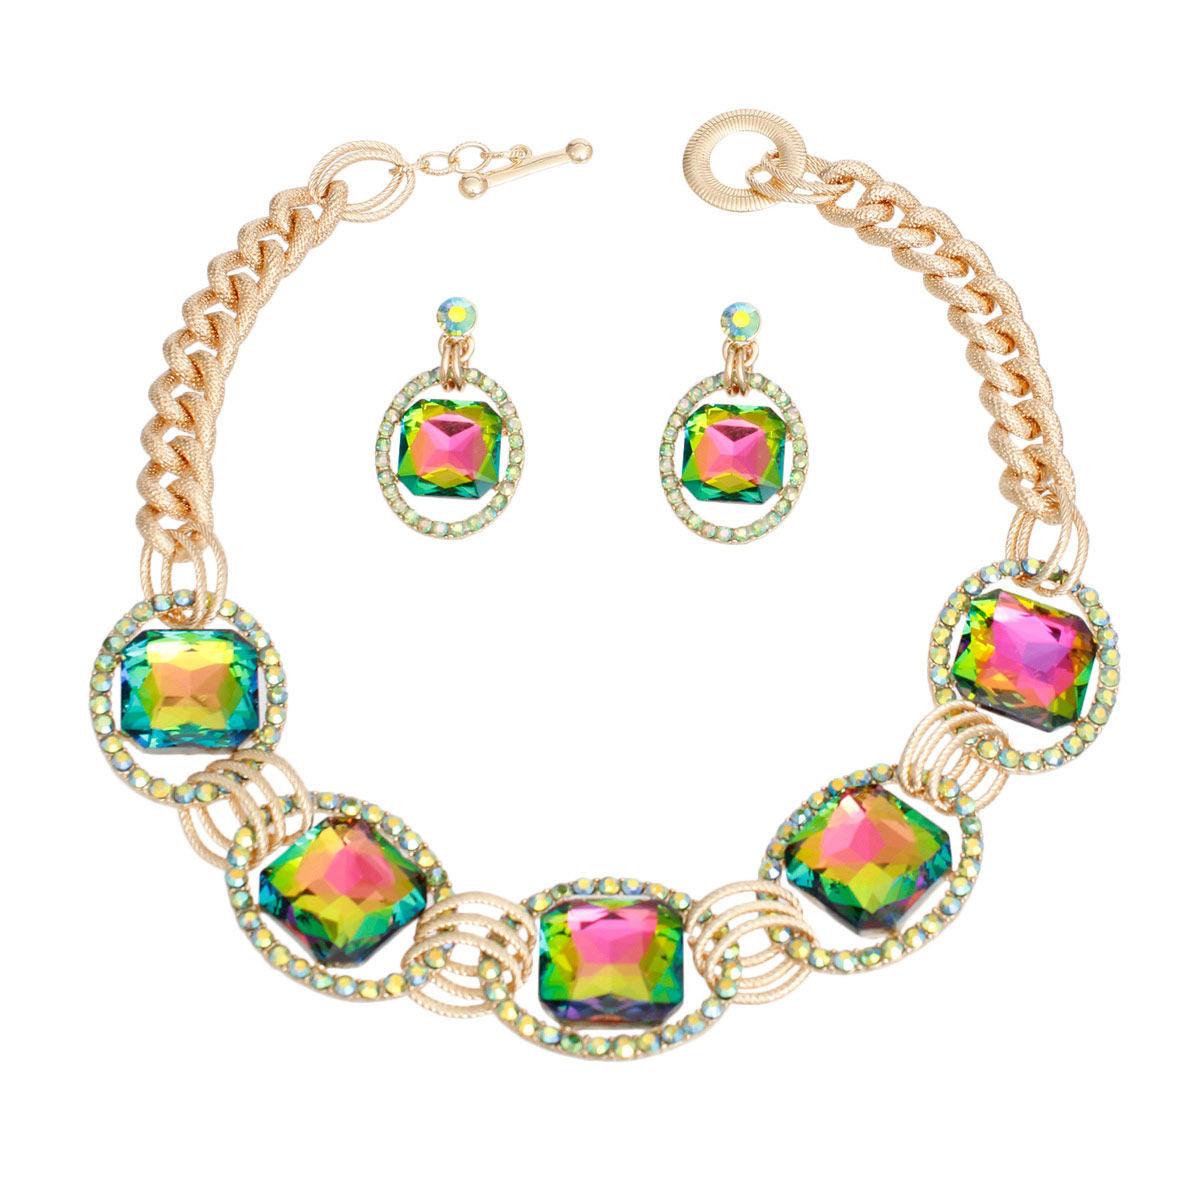 Unique Gold Necklace Set with Textured Chain & Vibrant Accents